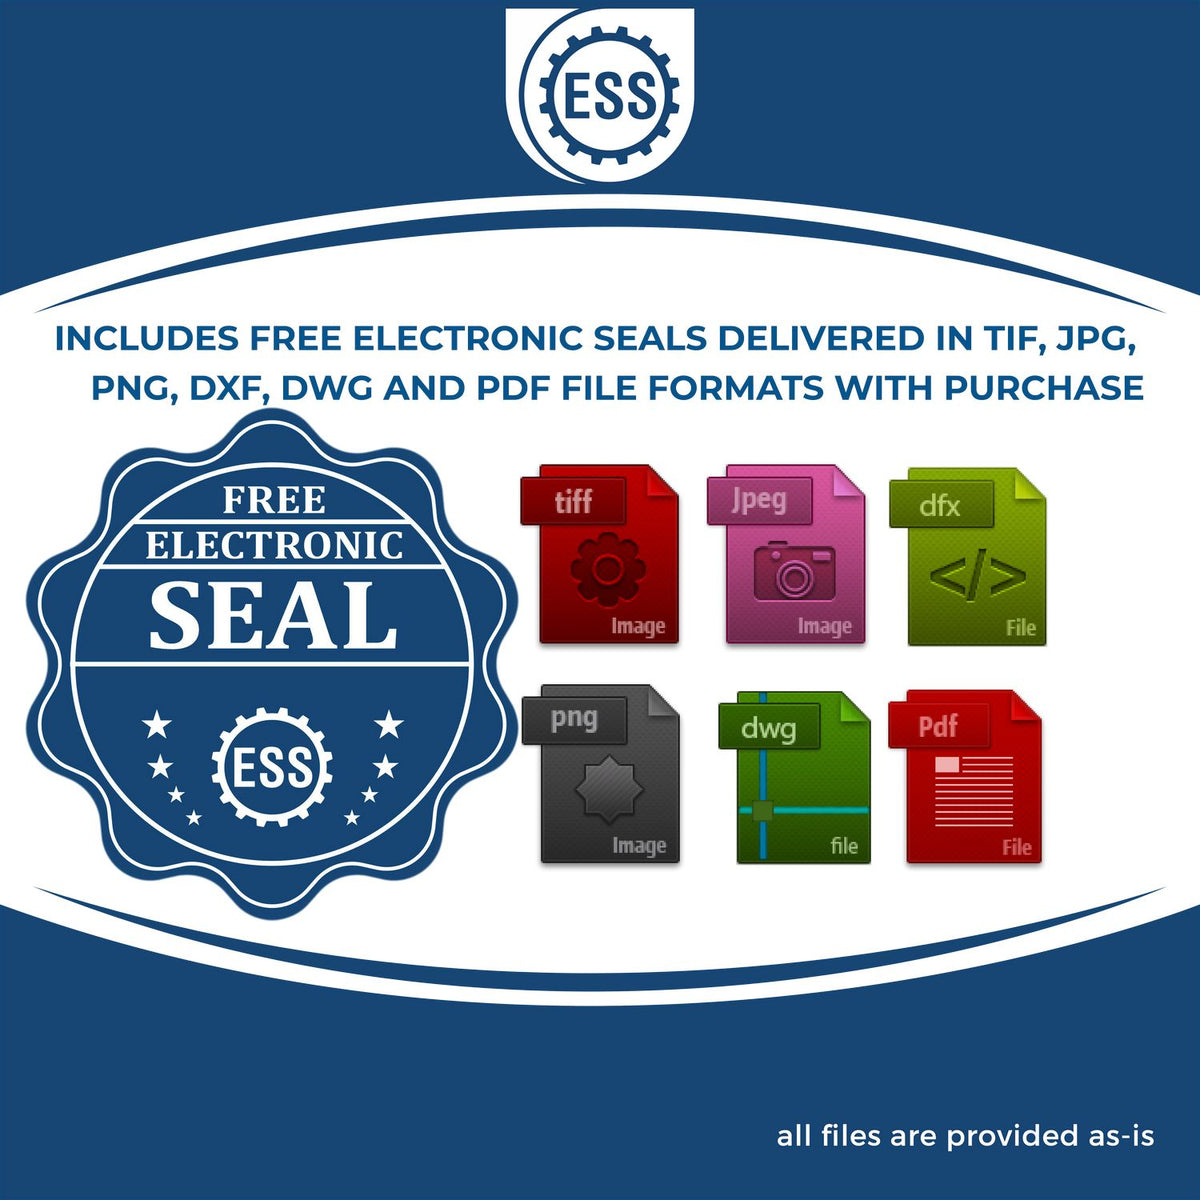 An infographic for the free electronic seal for the Hybrid New York Engineer Seal illustrating the different file type icons such as DXF, DWG, TIF, JPG and PNG.